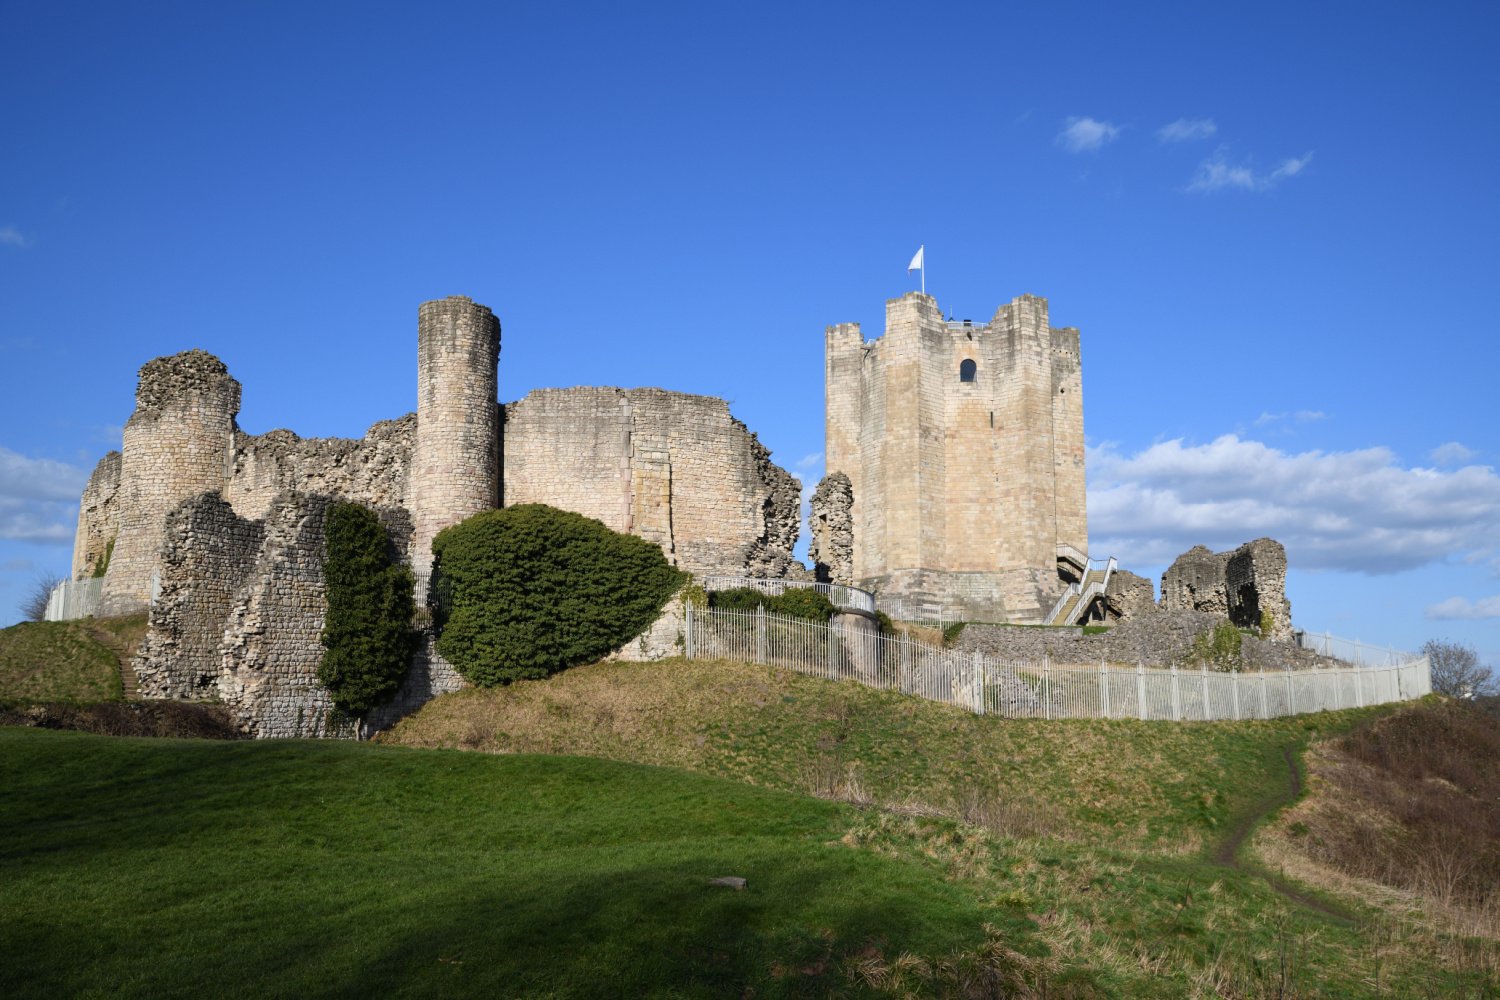 Image name conisbrough castle near doncaster south yorkshire the 9 image from the post A look at the history of Conisbrough Castle, with Dr Emma Wells in Yorkshire.com.